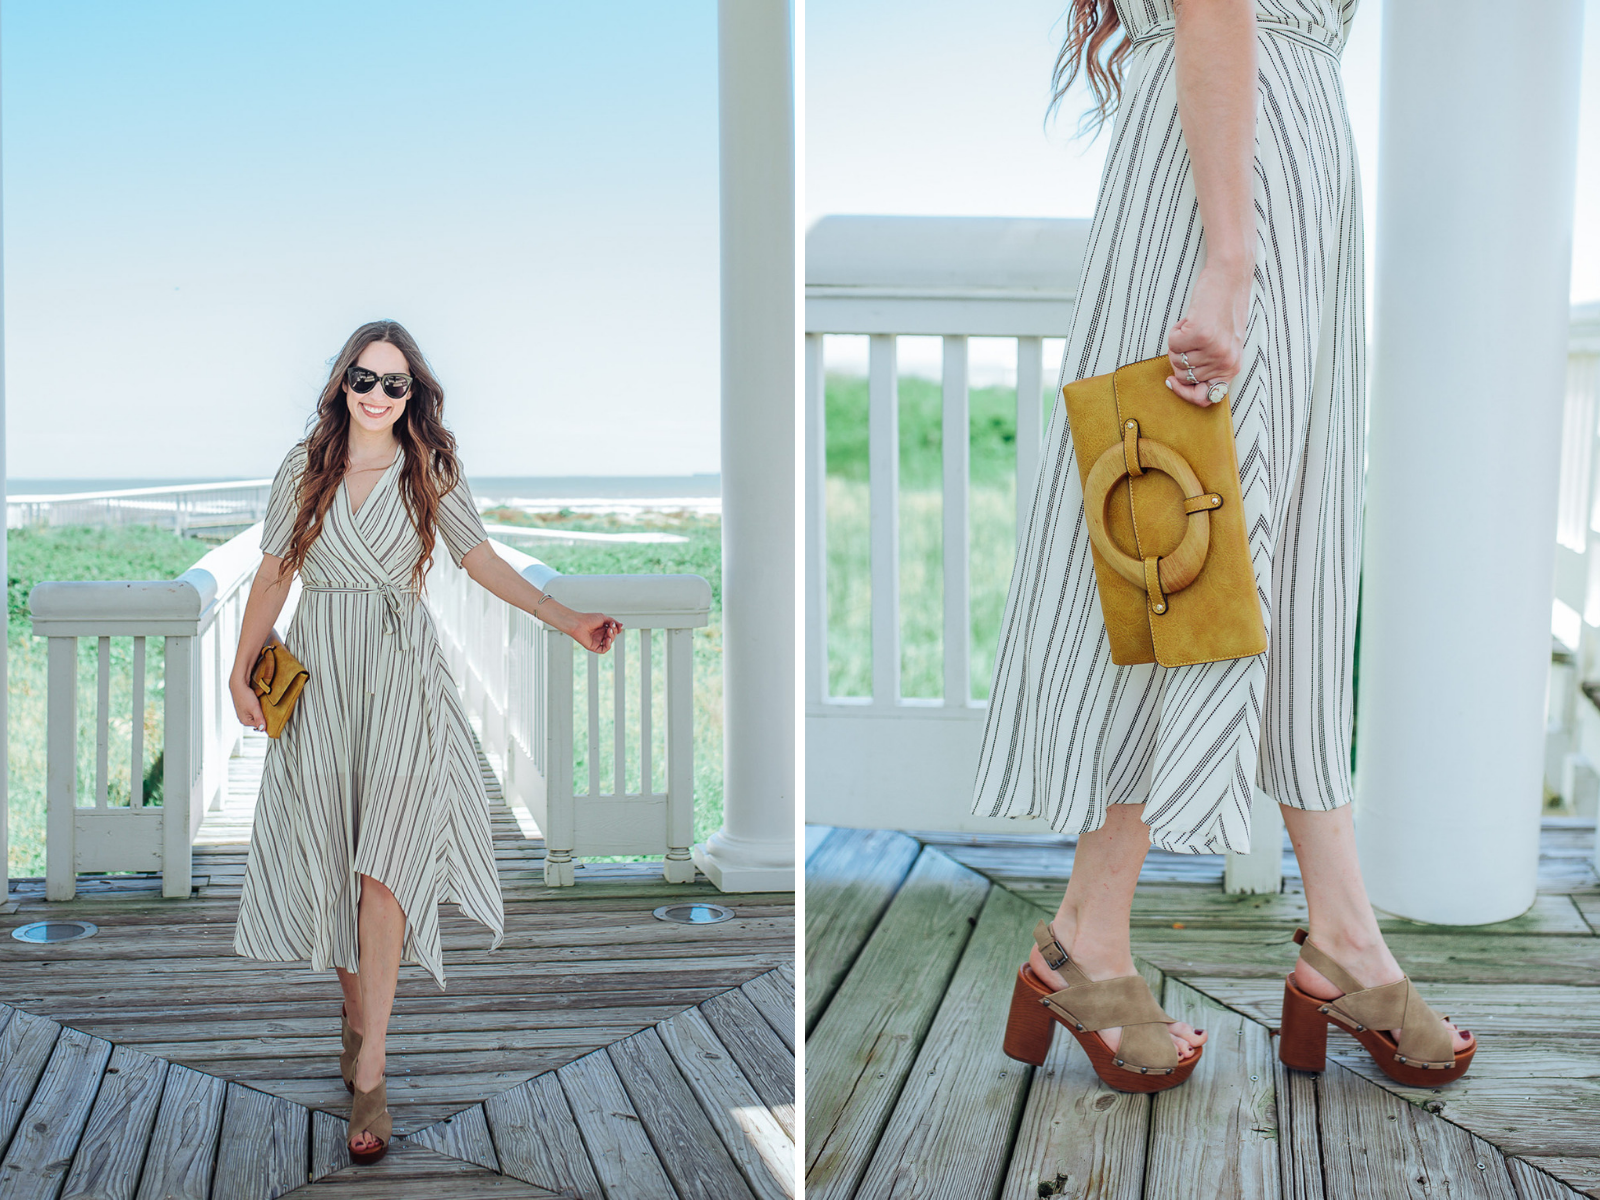 Francesca’s Sundress Outfits to wear for Mothers Day, featured by top US fashion blog, Lone Star Looking Glass: image of a woman wearing a Francesca’s striped midi dress, blocked heels and a yellow folder clutch